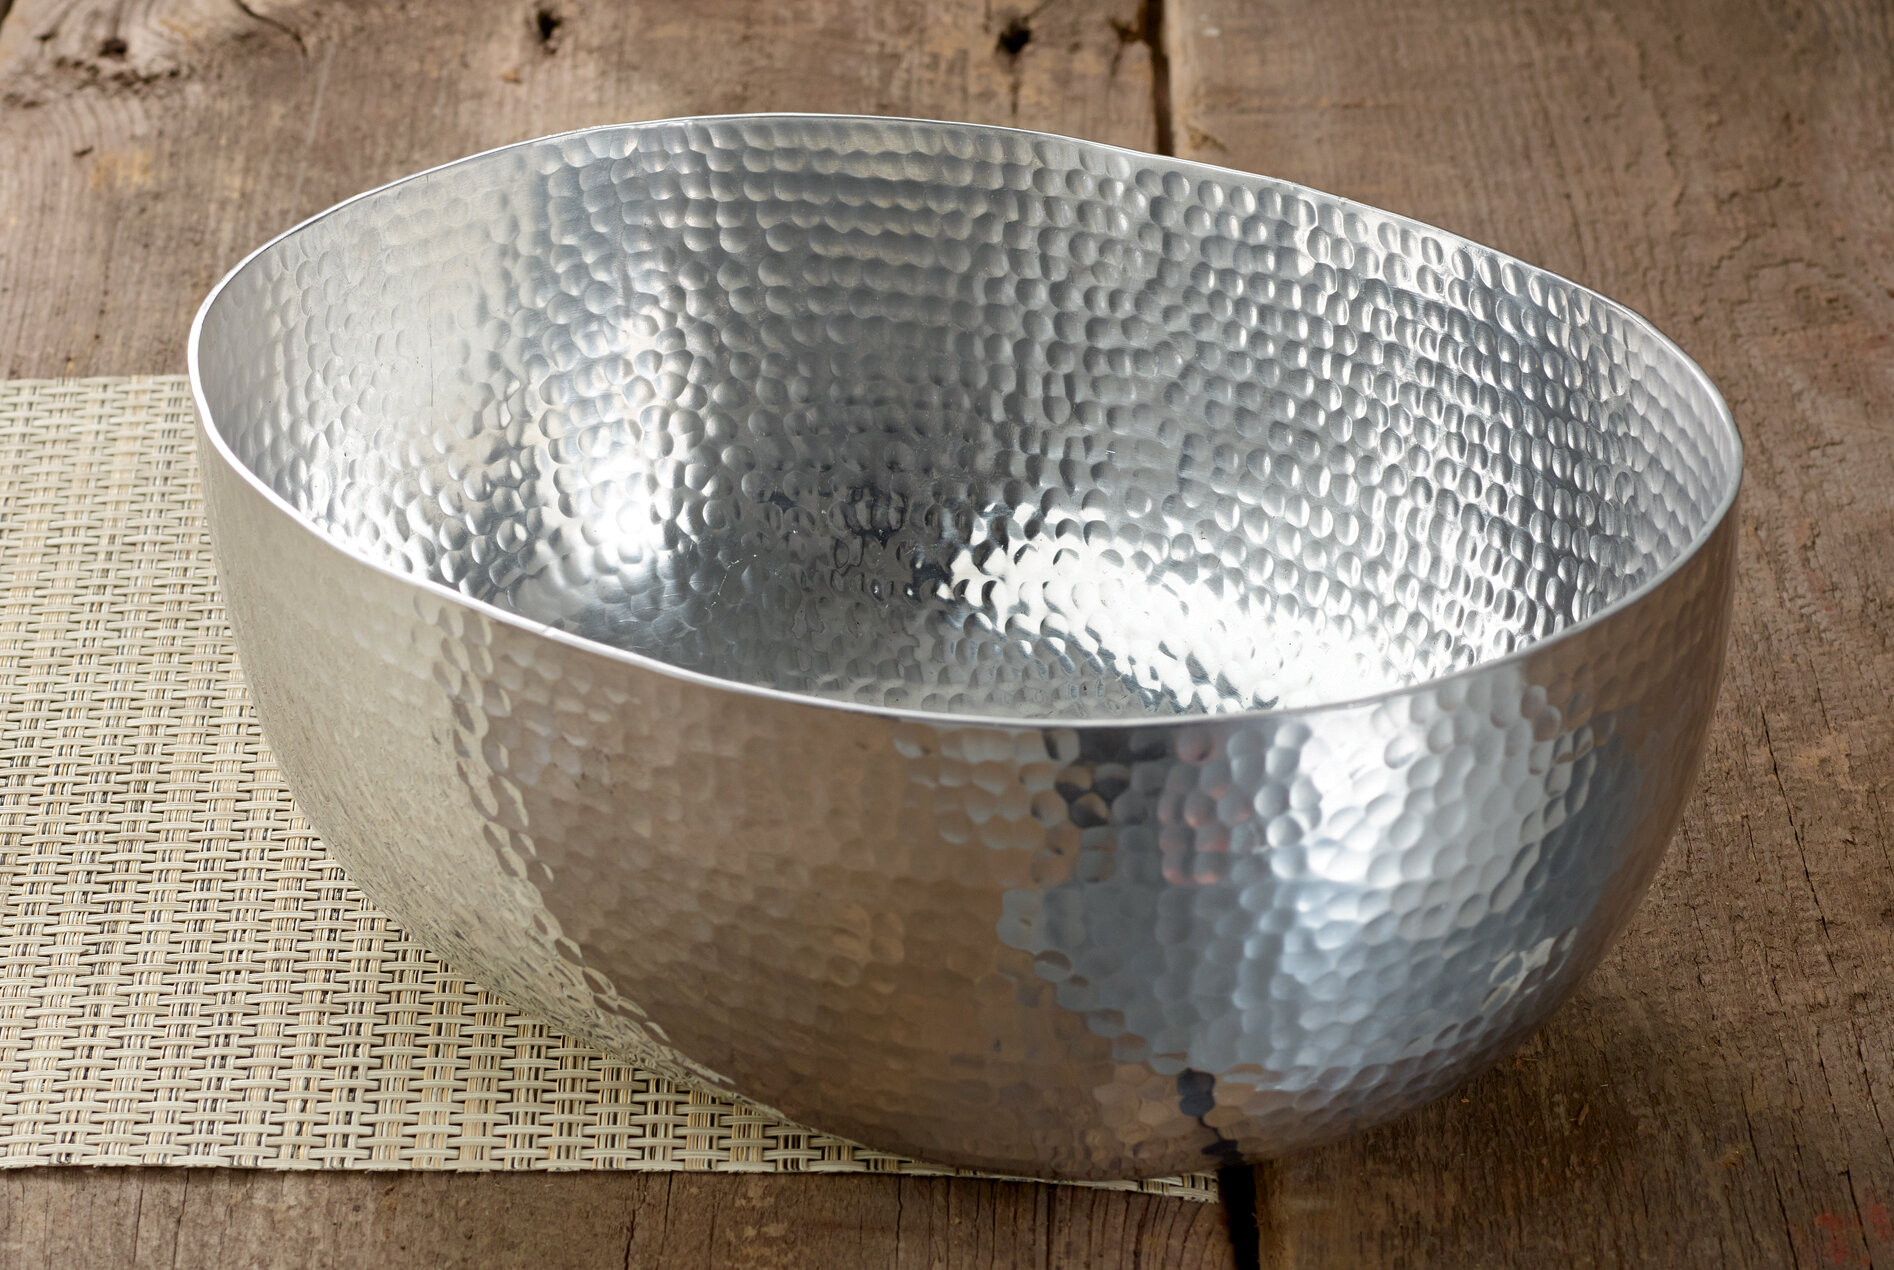 Cool Hammered Aluminum Bowl with Scalloped Handles